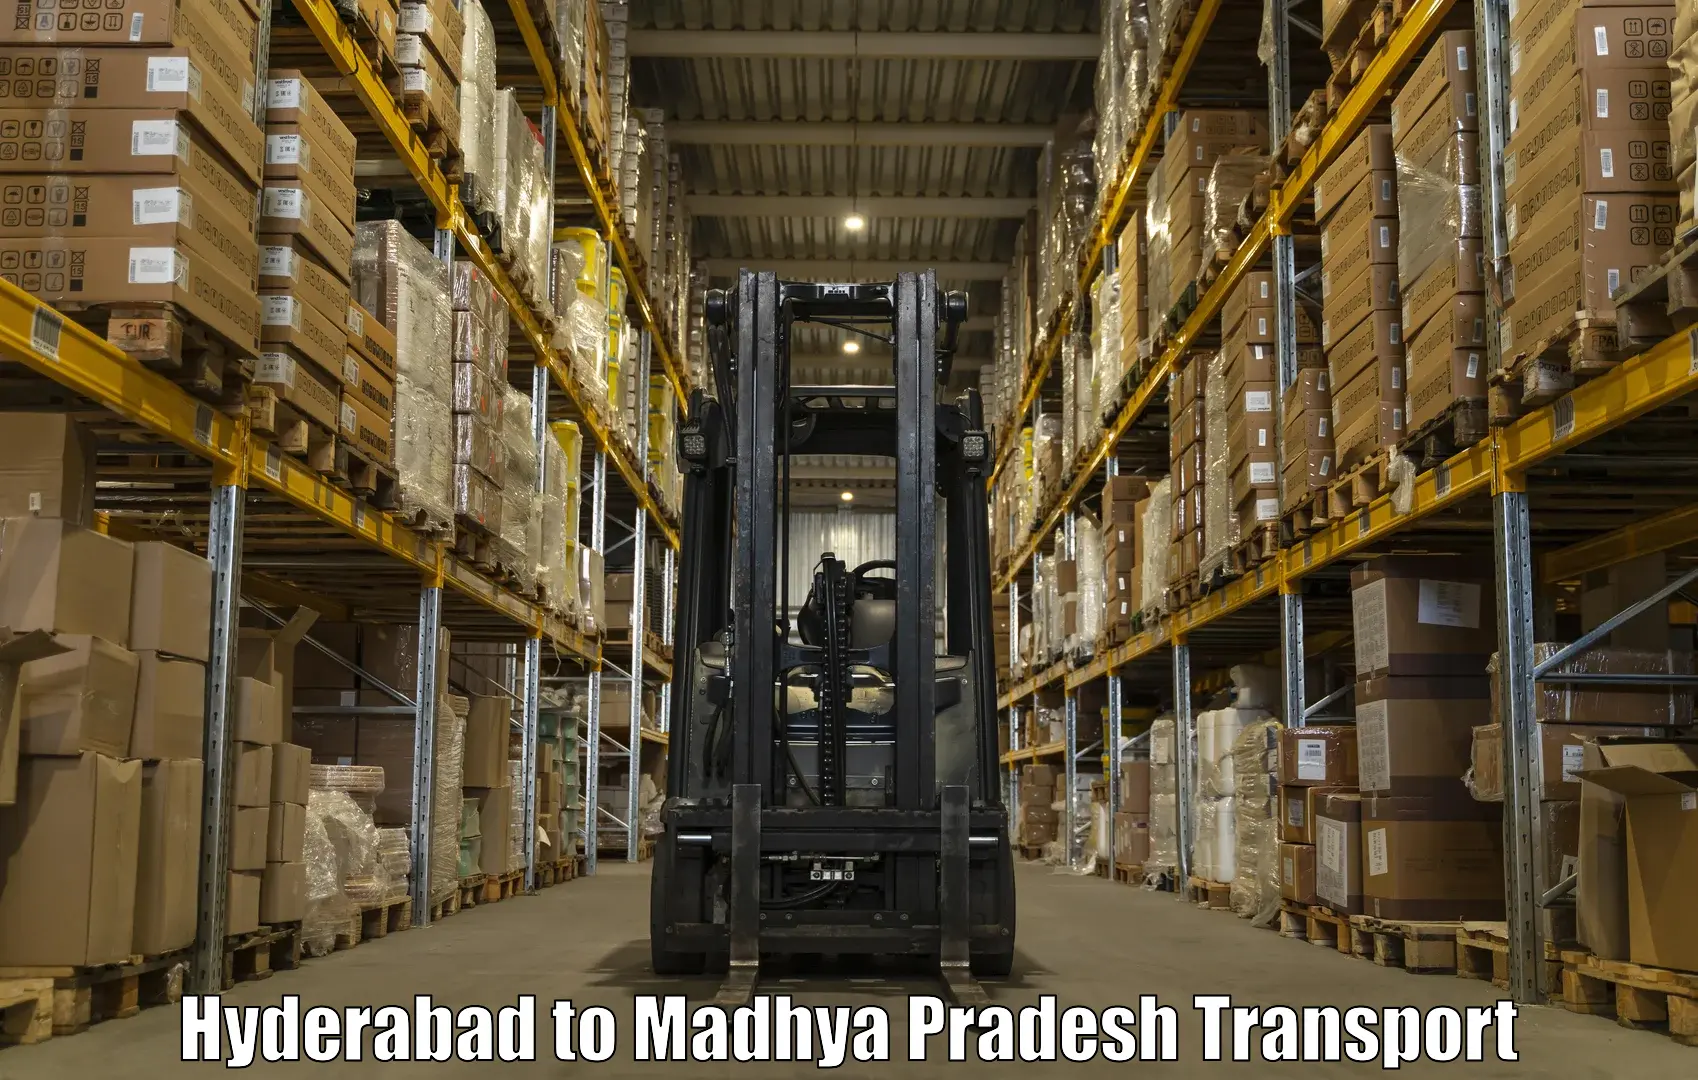 Truck transport companies in India Hyderabad to Panna